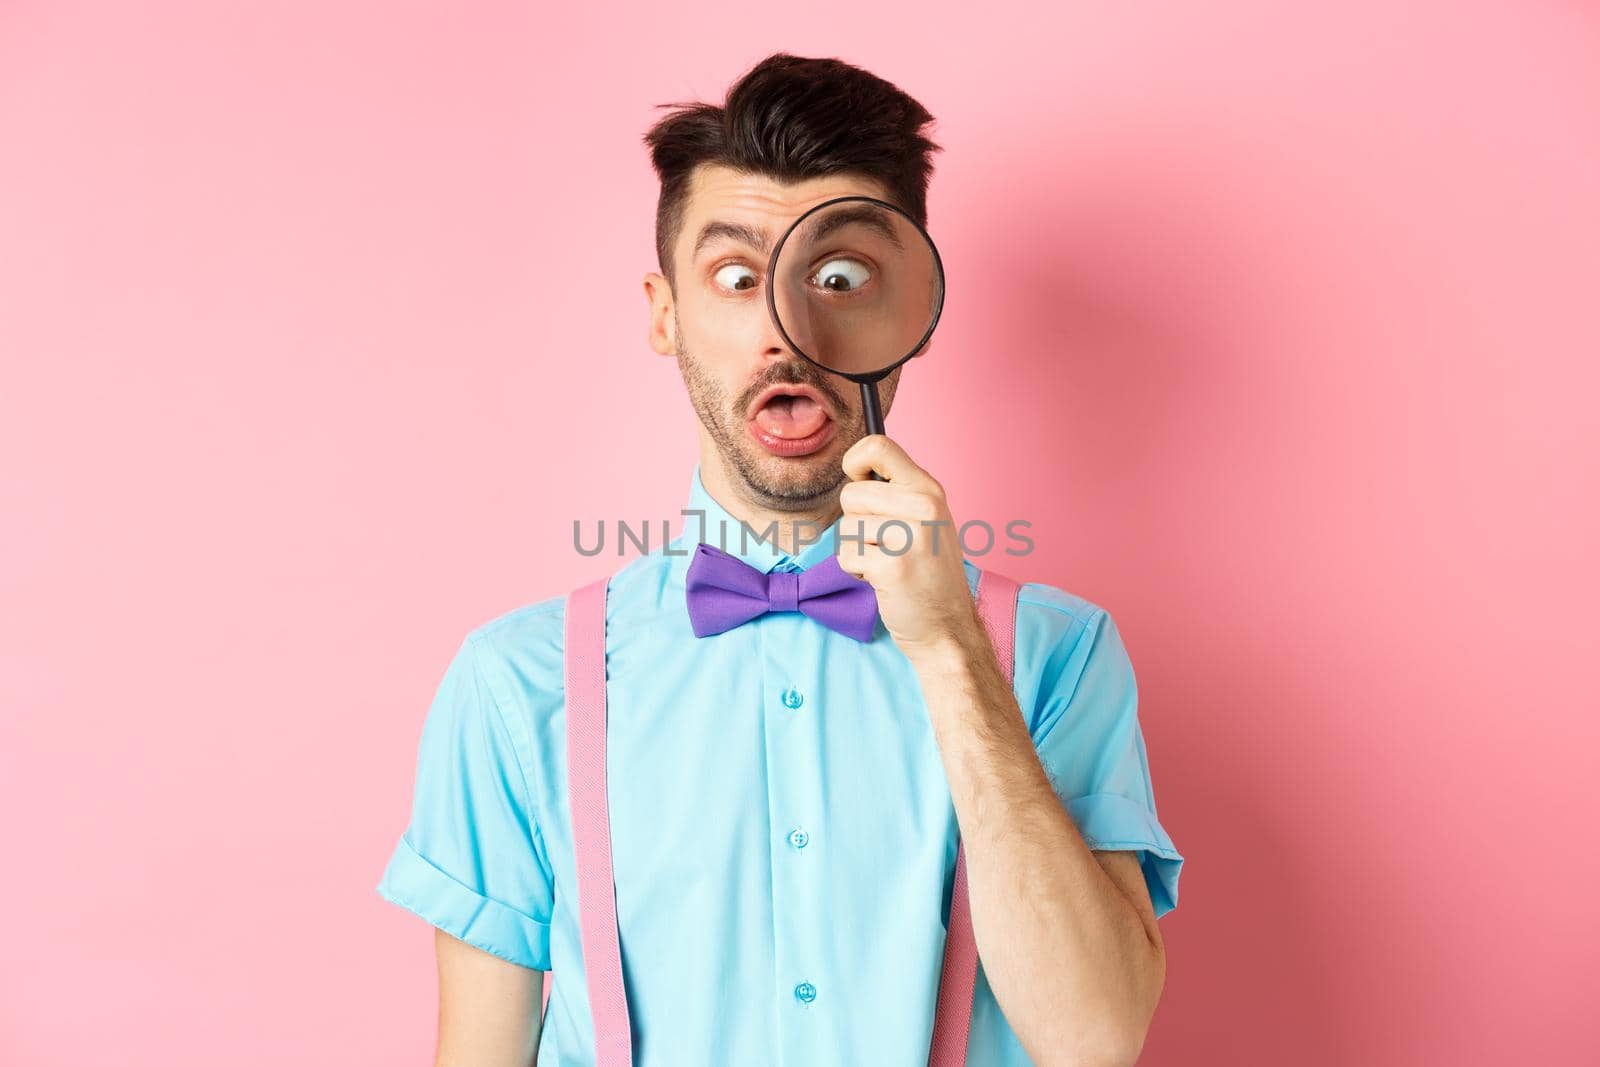 Funny man in bow-tie look through magnifying glass, squinting and making silly faces, standing on pink background.